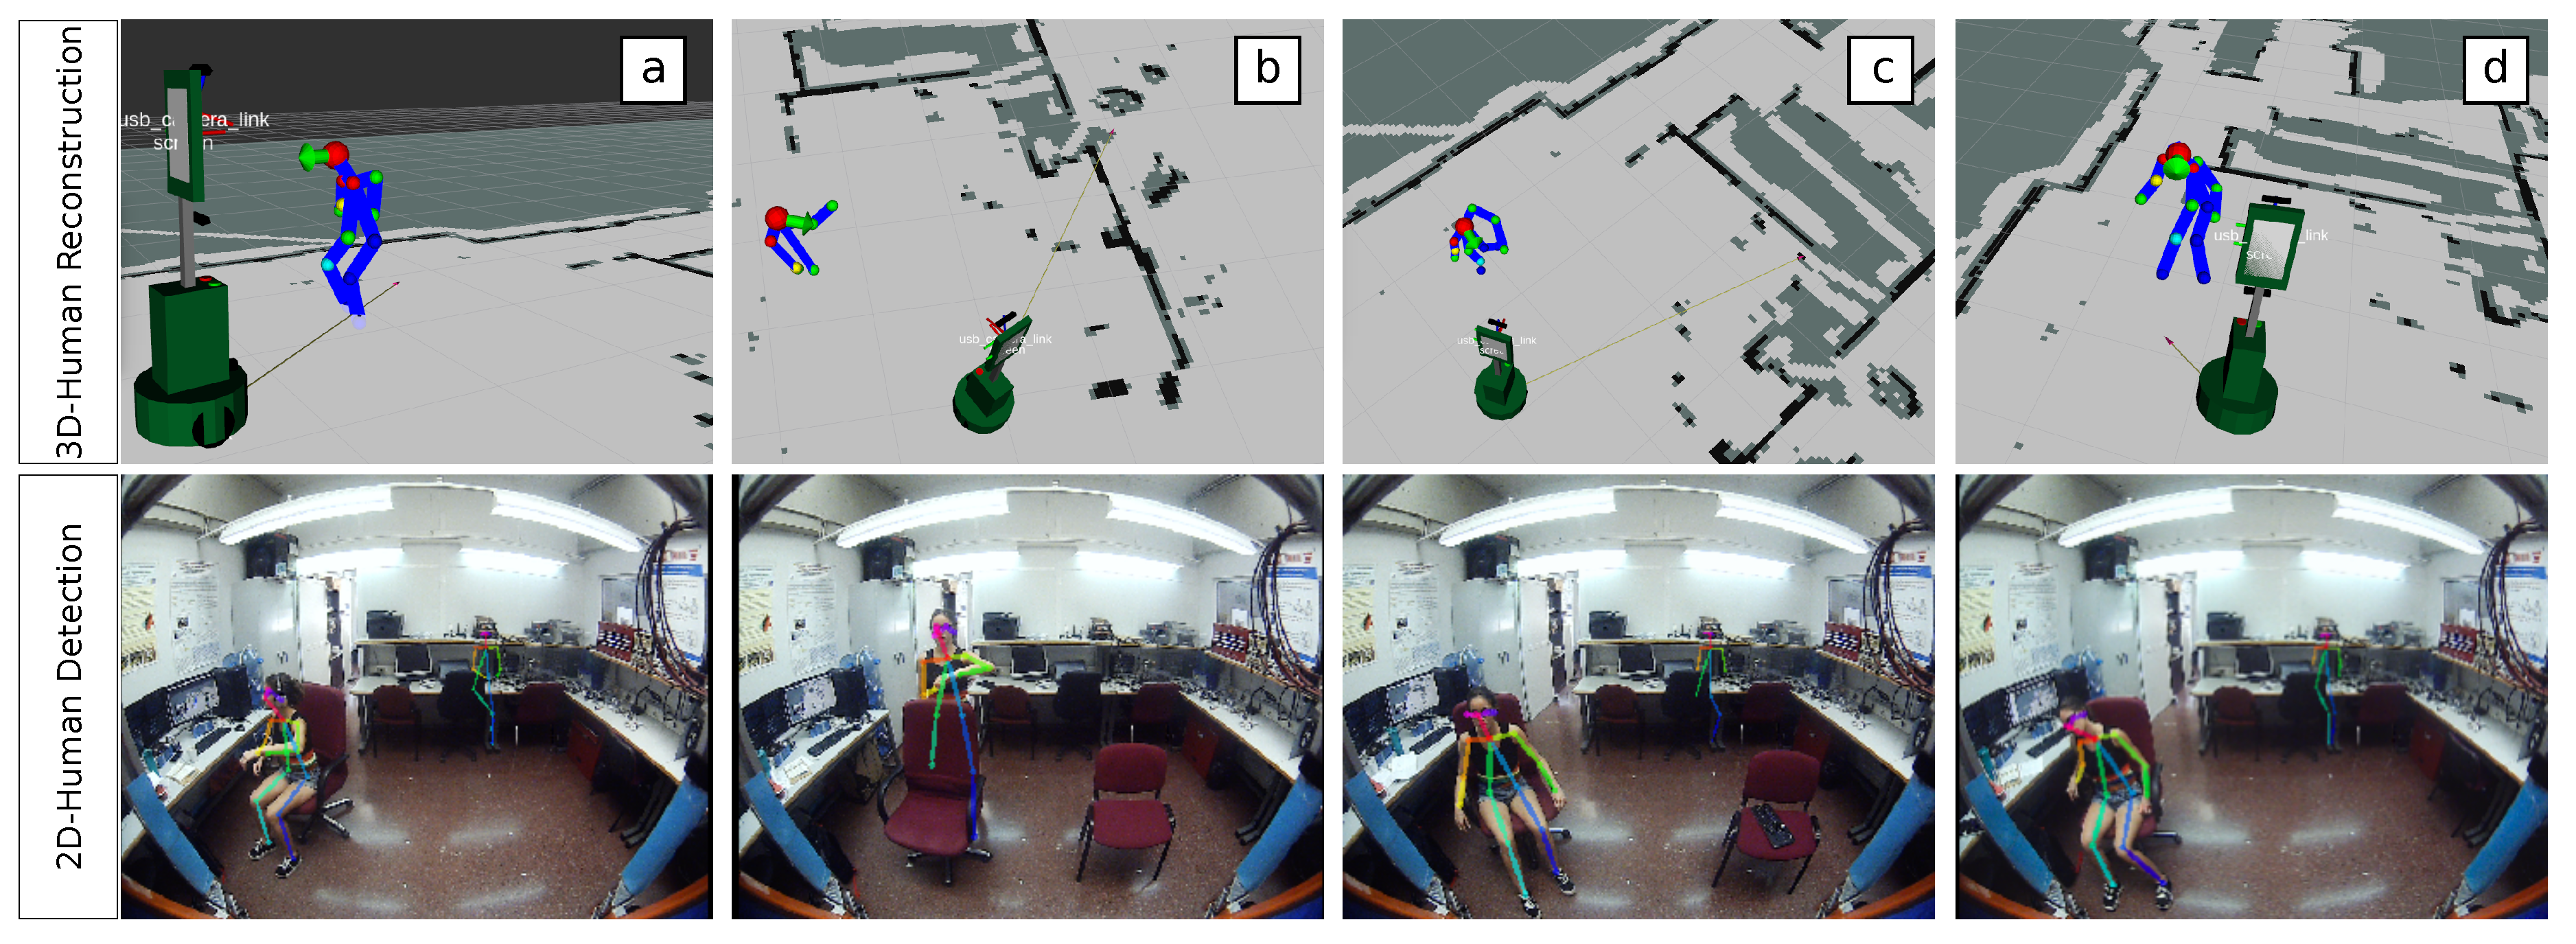 Sensors | Free Full-Text | Human 3D Pose Estimation with a Tilting for Social Mobile Robot Interaction